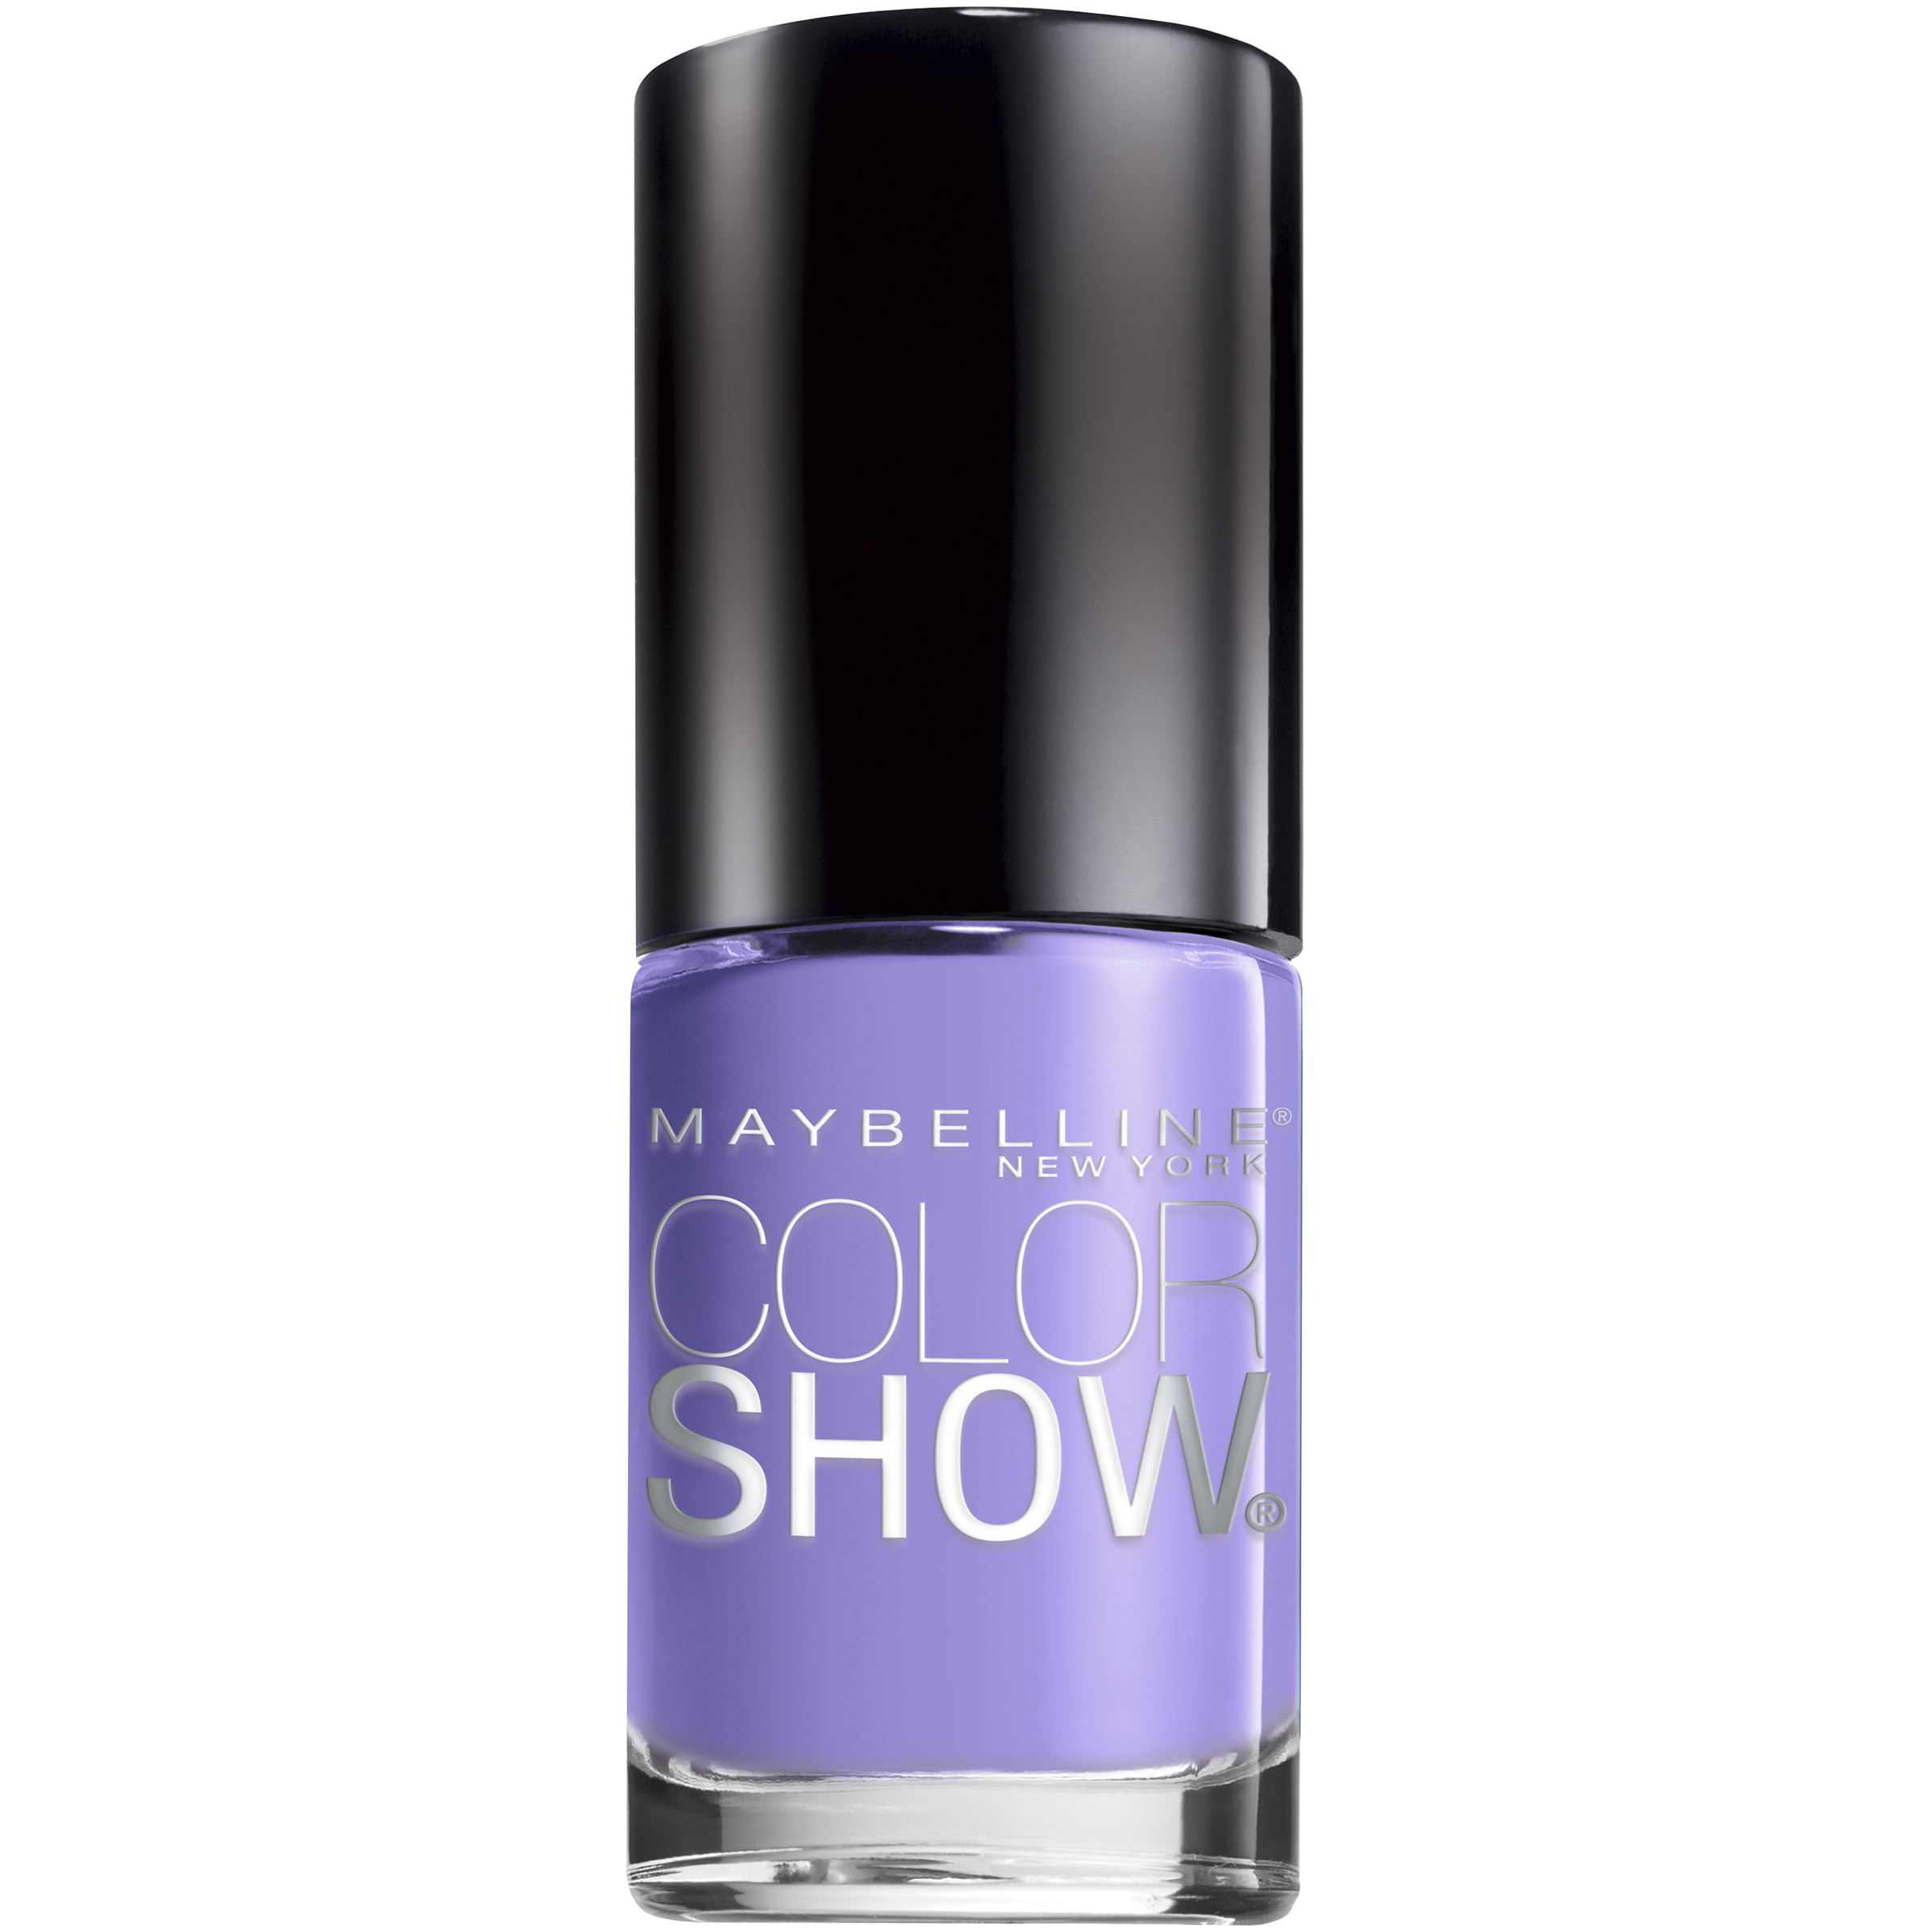 Maybelline New York Color Show Nail Color - Iced Queen, 0.23 fl oz